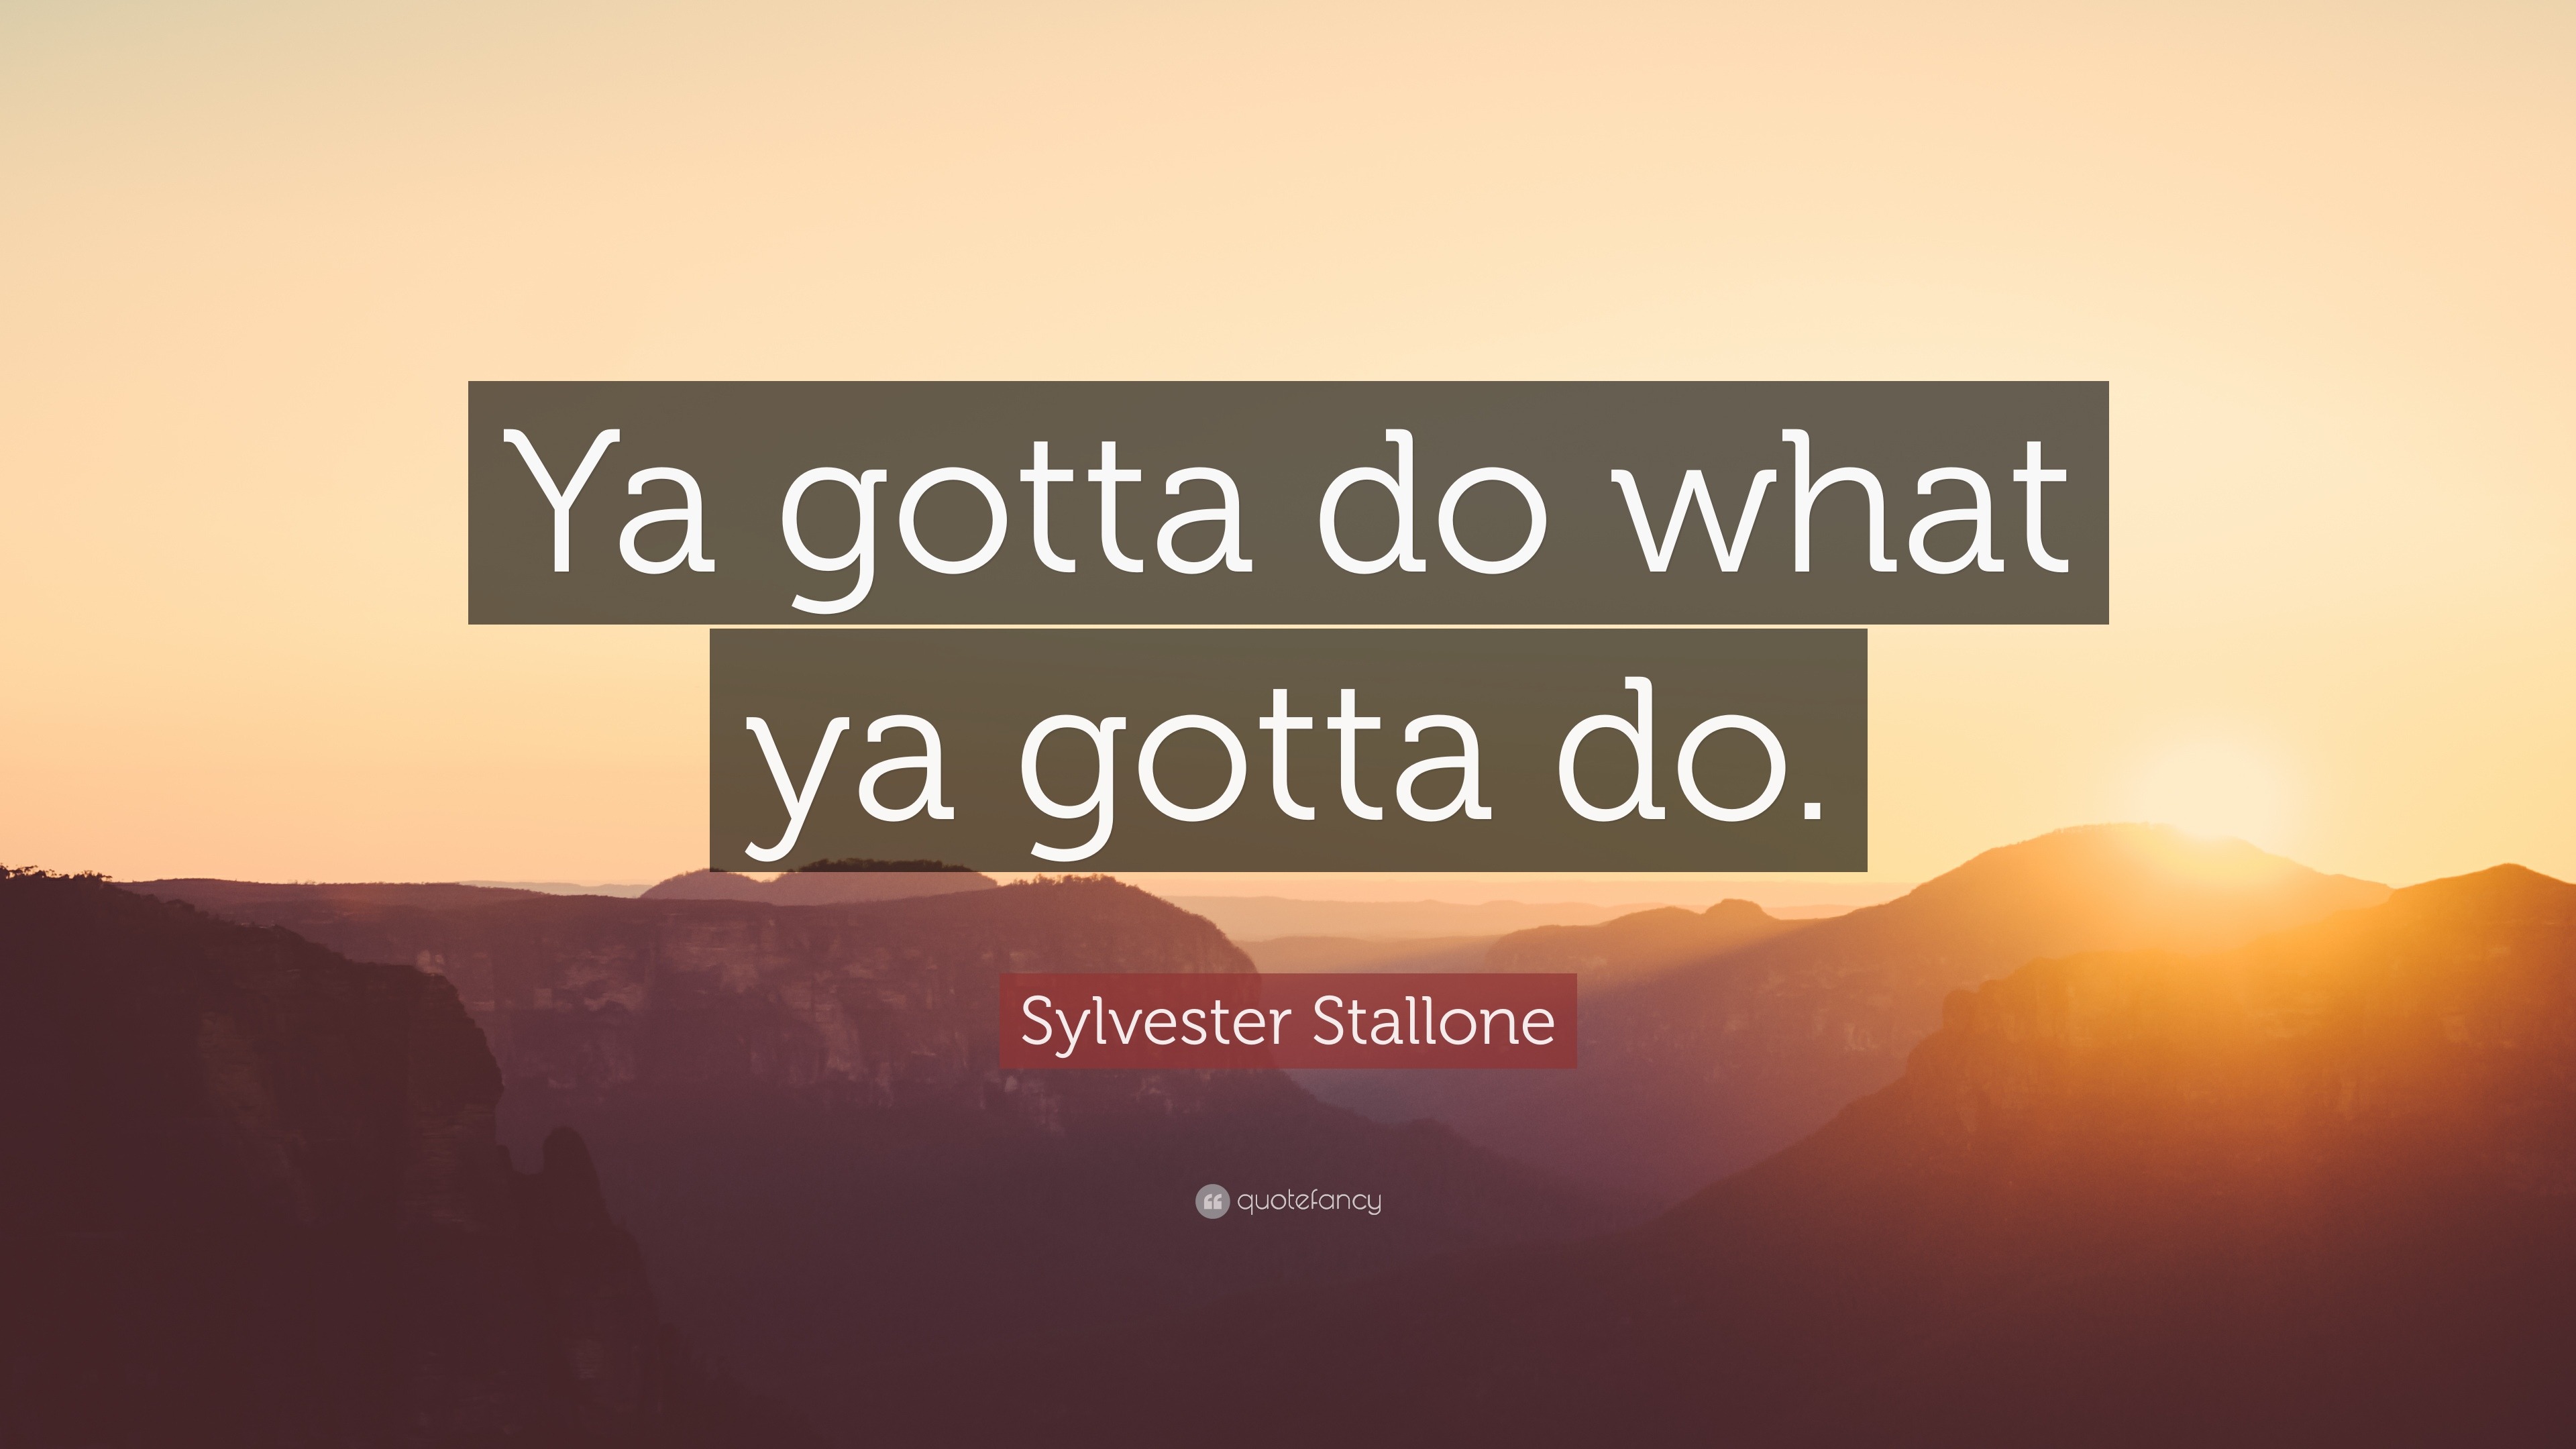 Sylvester Stallone Quotes (100 wallpapers) - Quotefancy